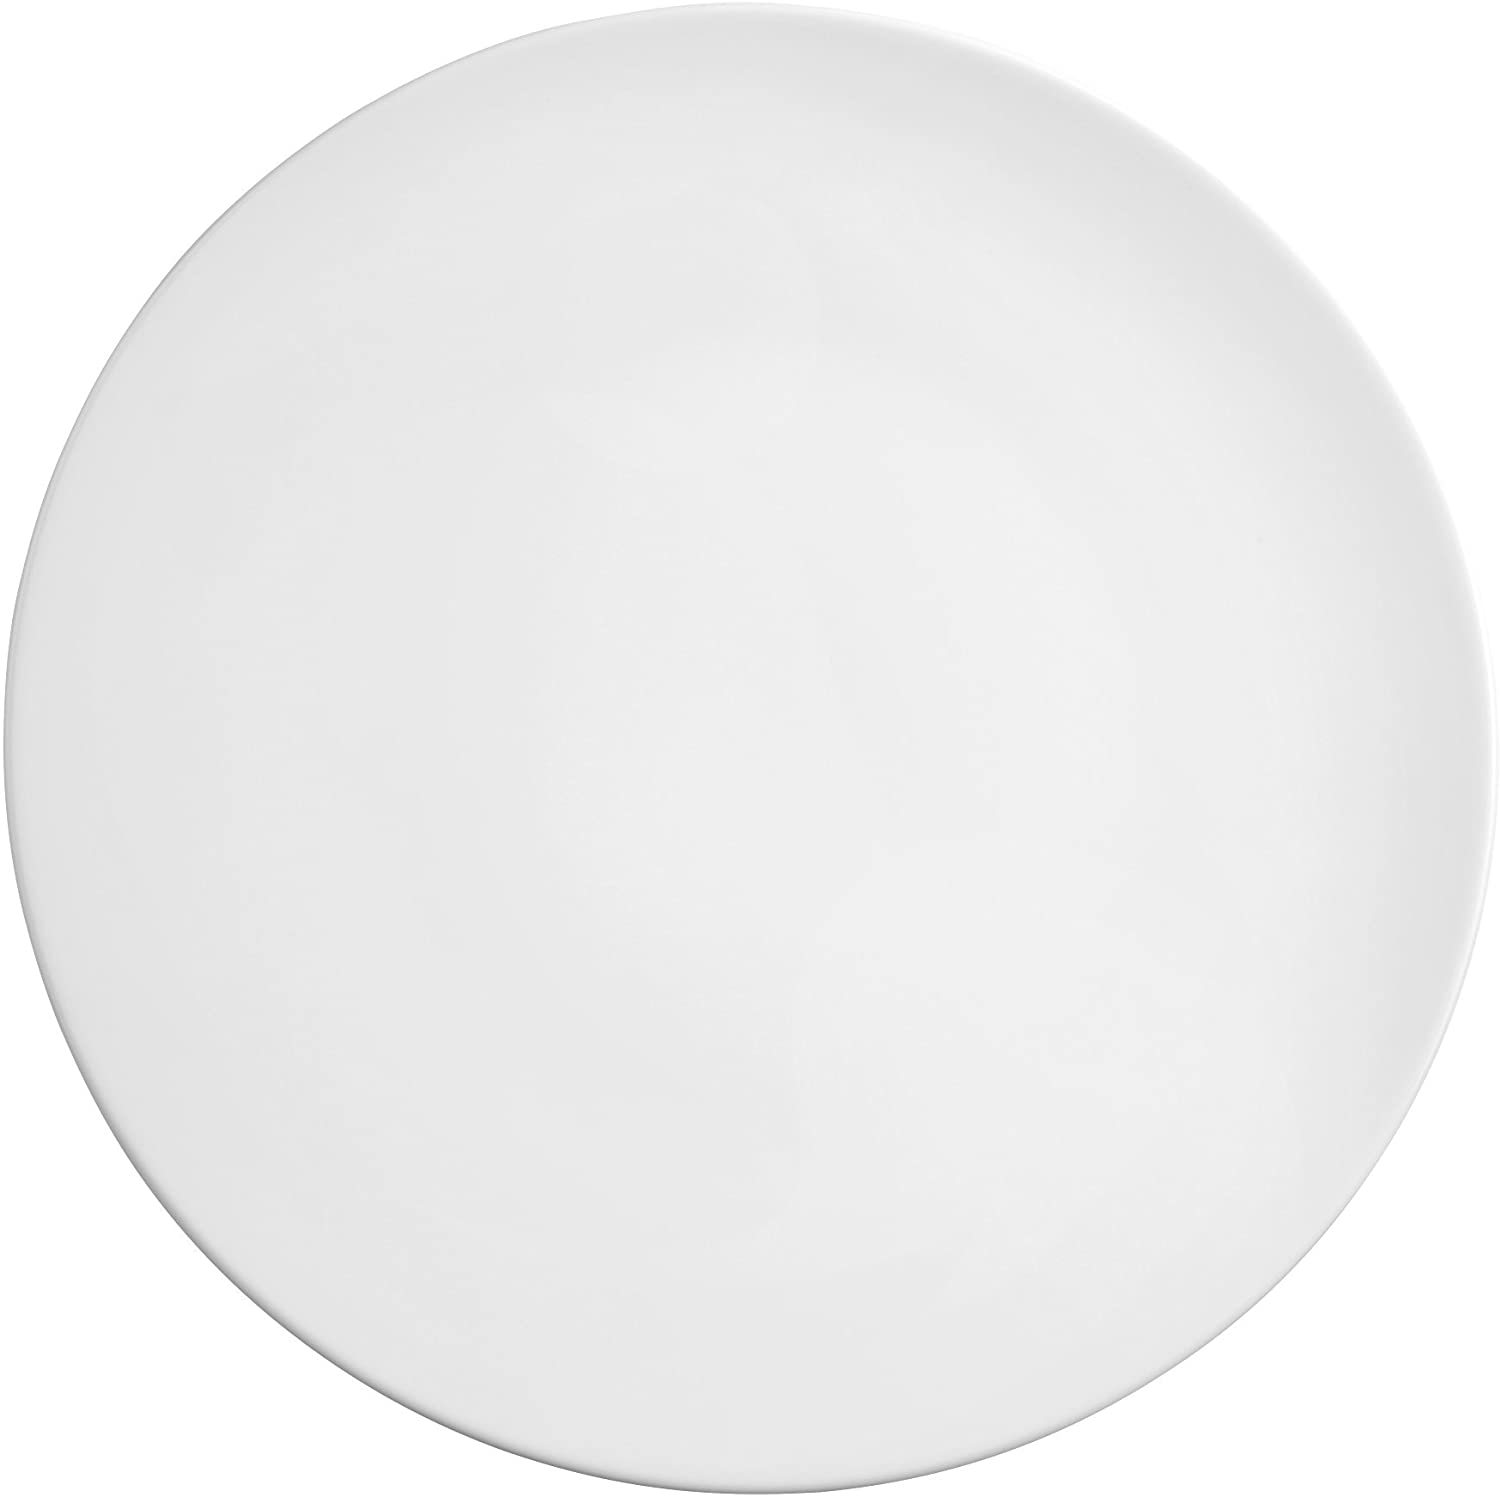 Coup Plate 28.4 cm Fine Dining White Universal 00006 by Seltmann Weiden